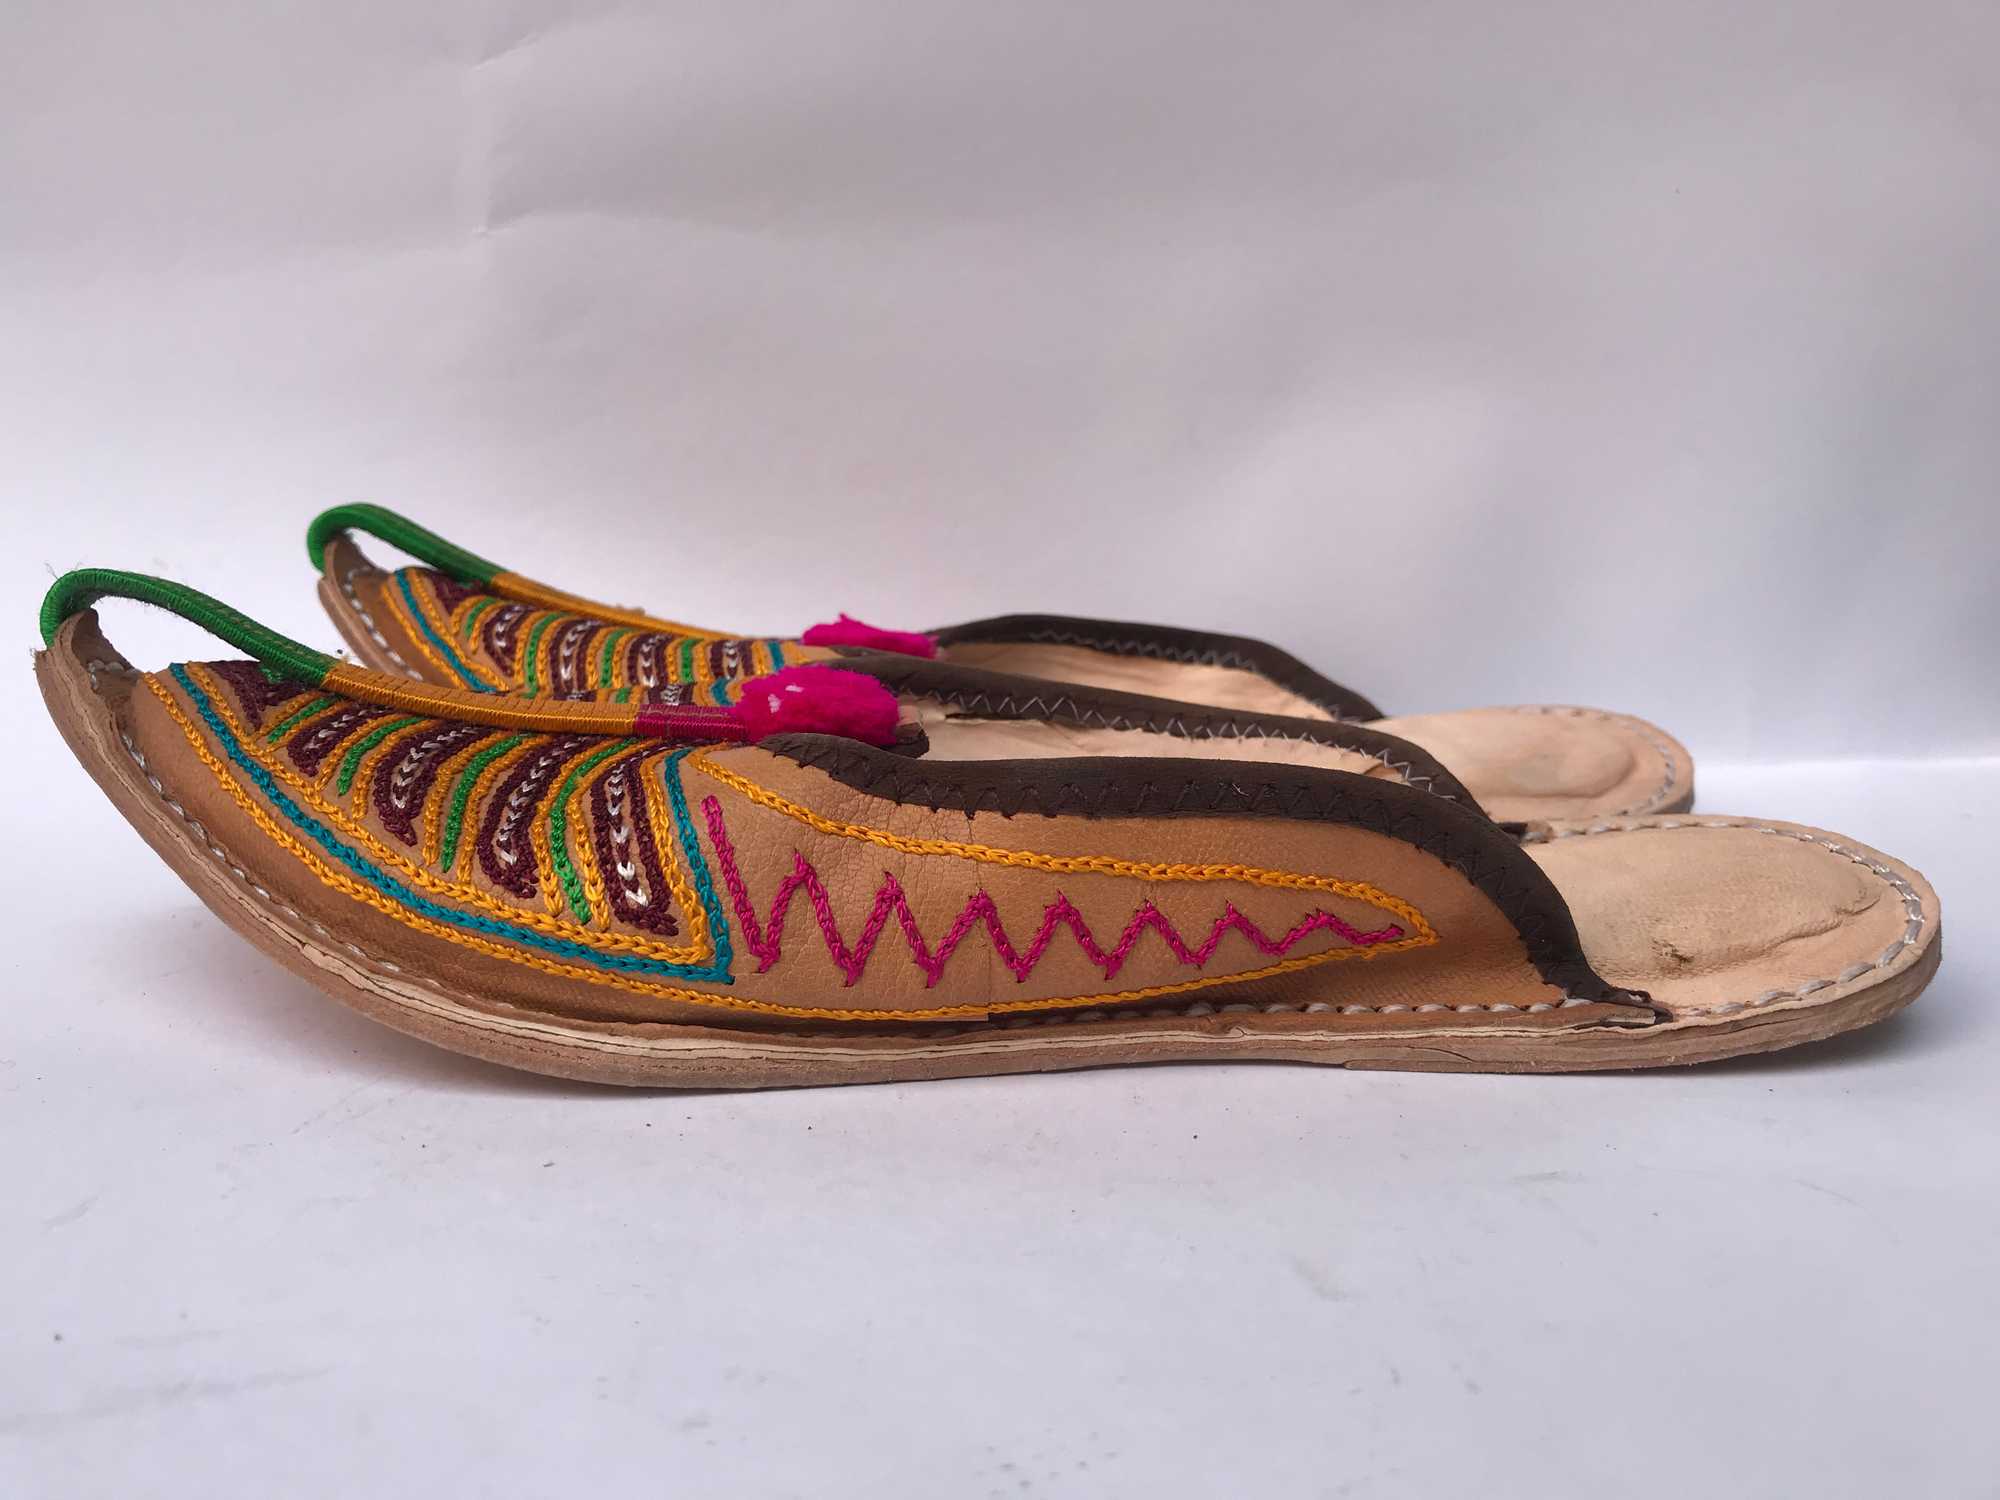 Nepali Handmade Aladdin Sandals, With Leather And Bead Design